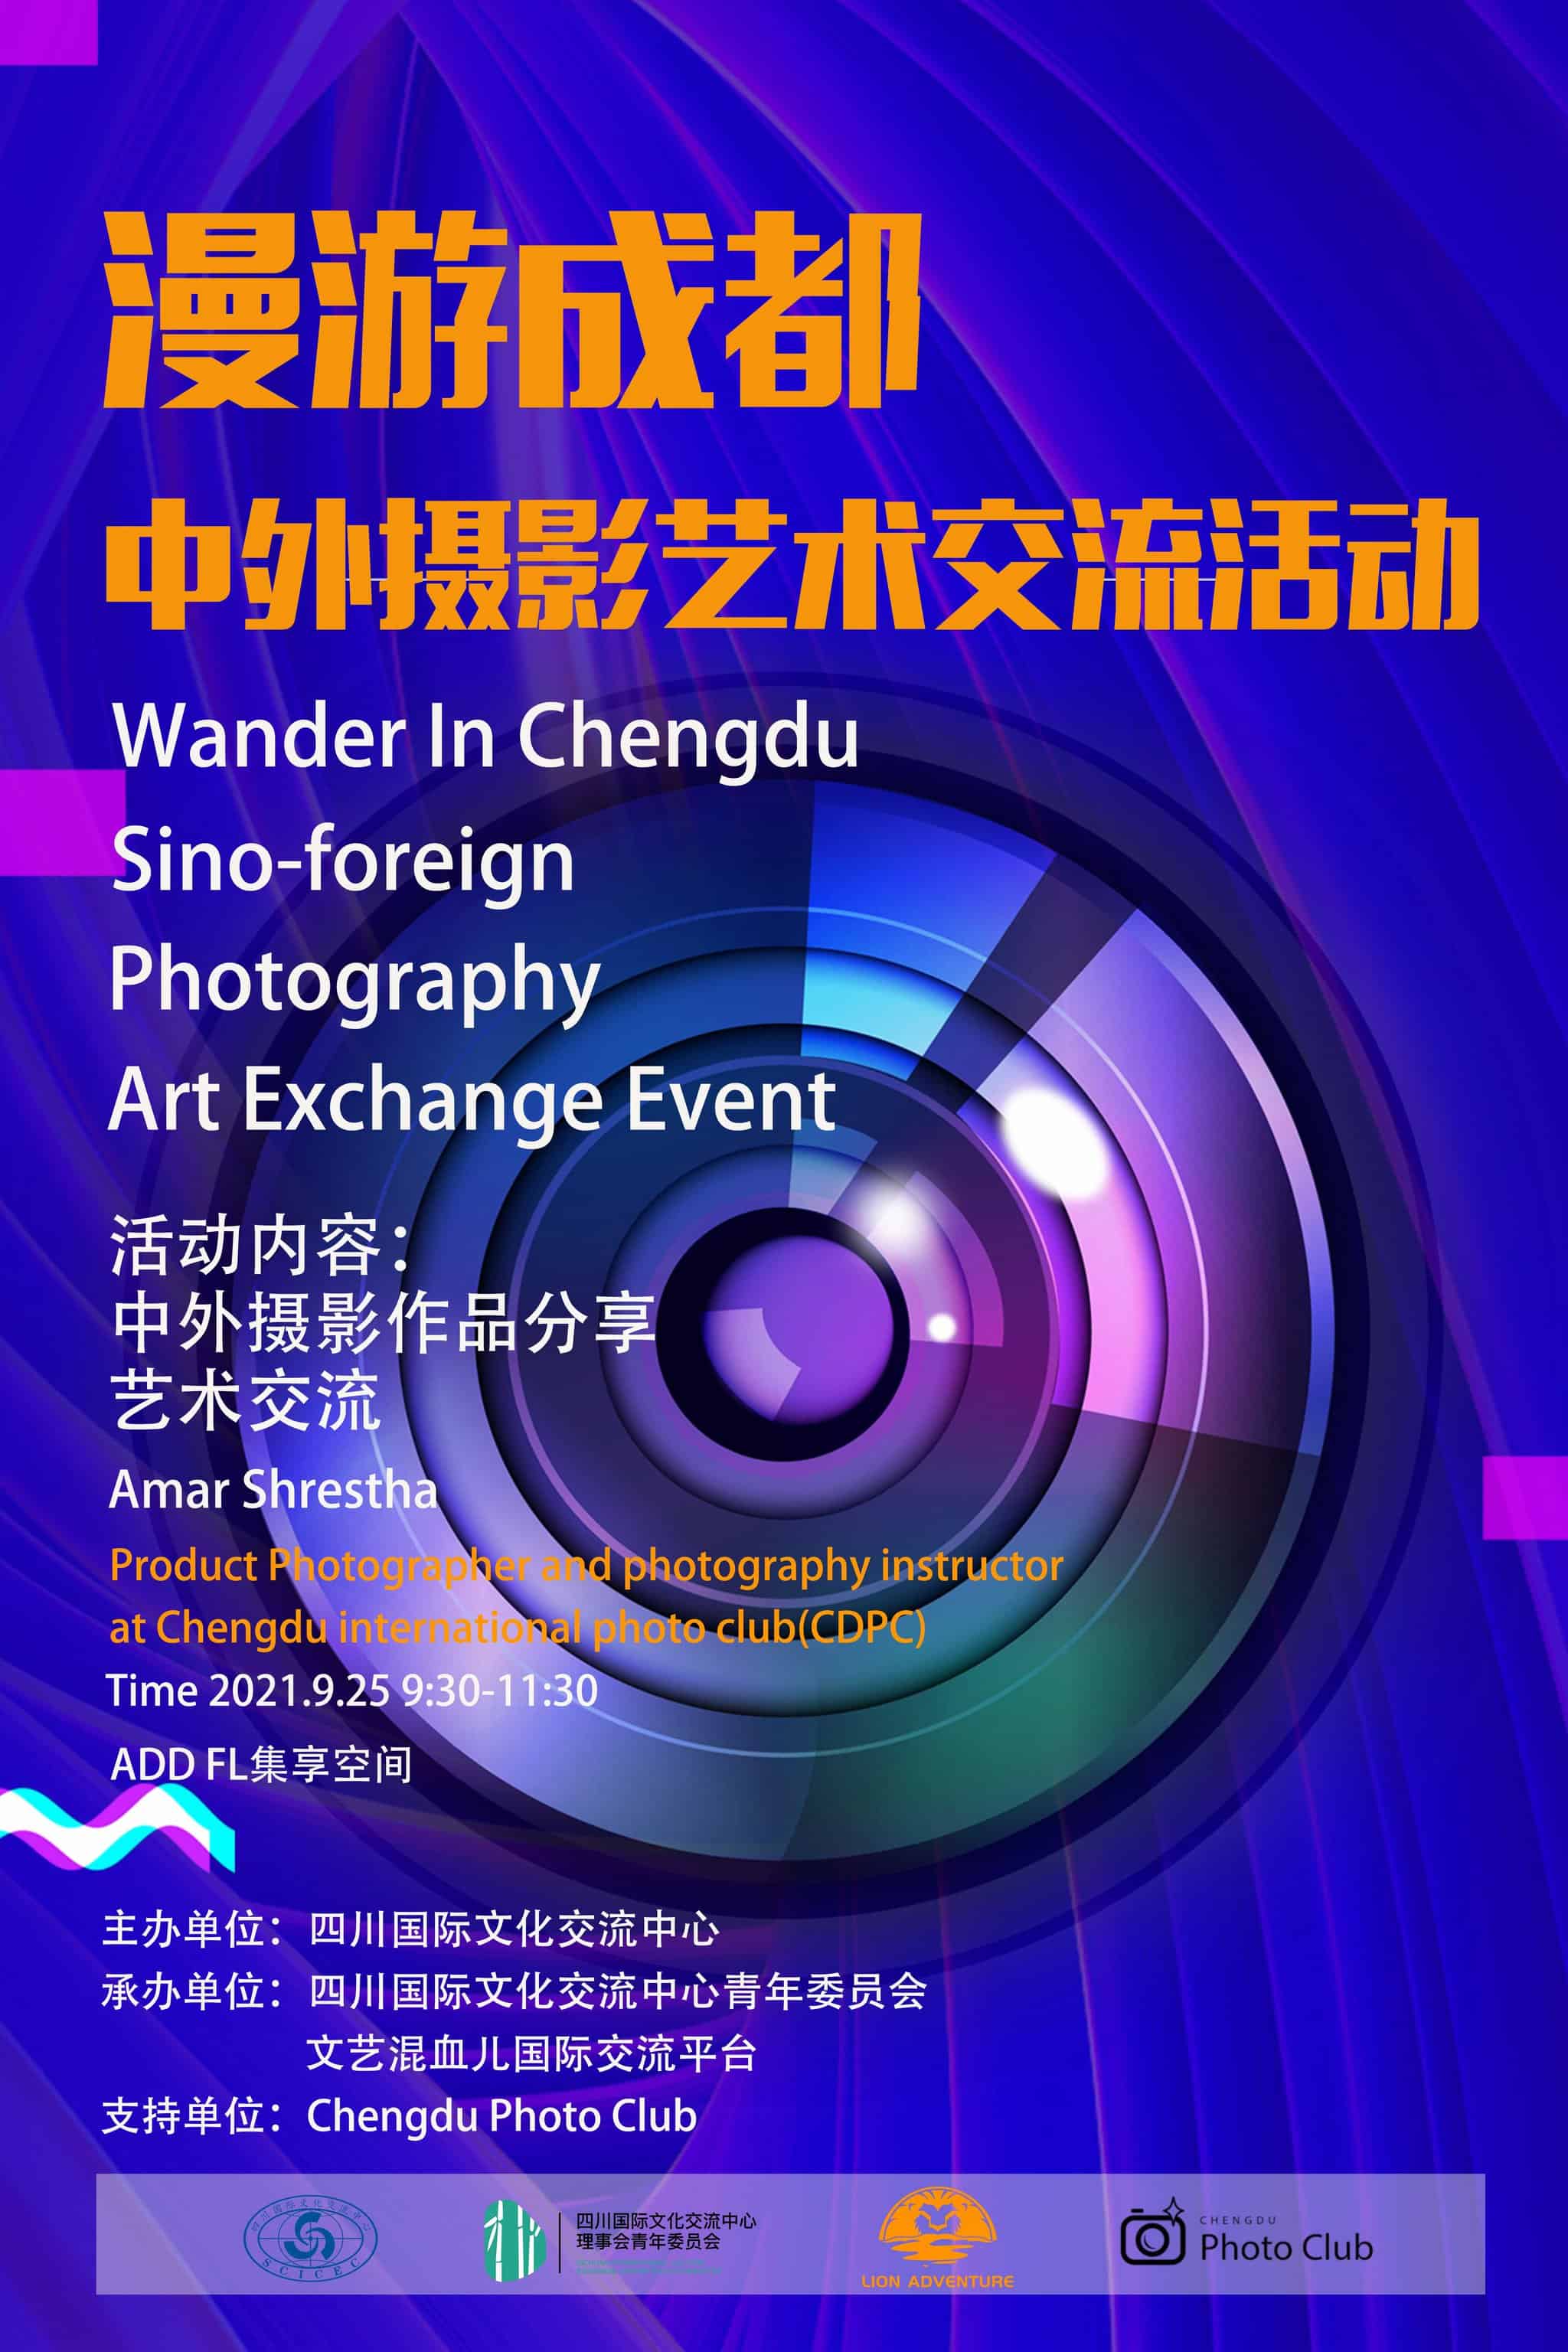 Sept.25th(Saturday):Sino-foreign Photography Art Exchange Event